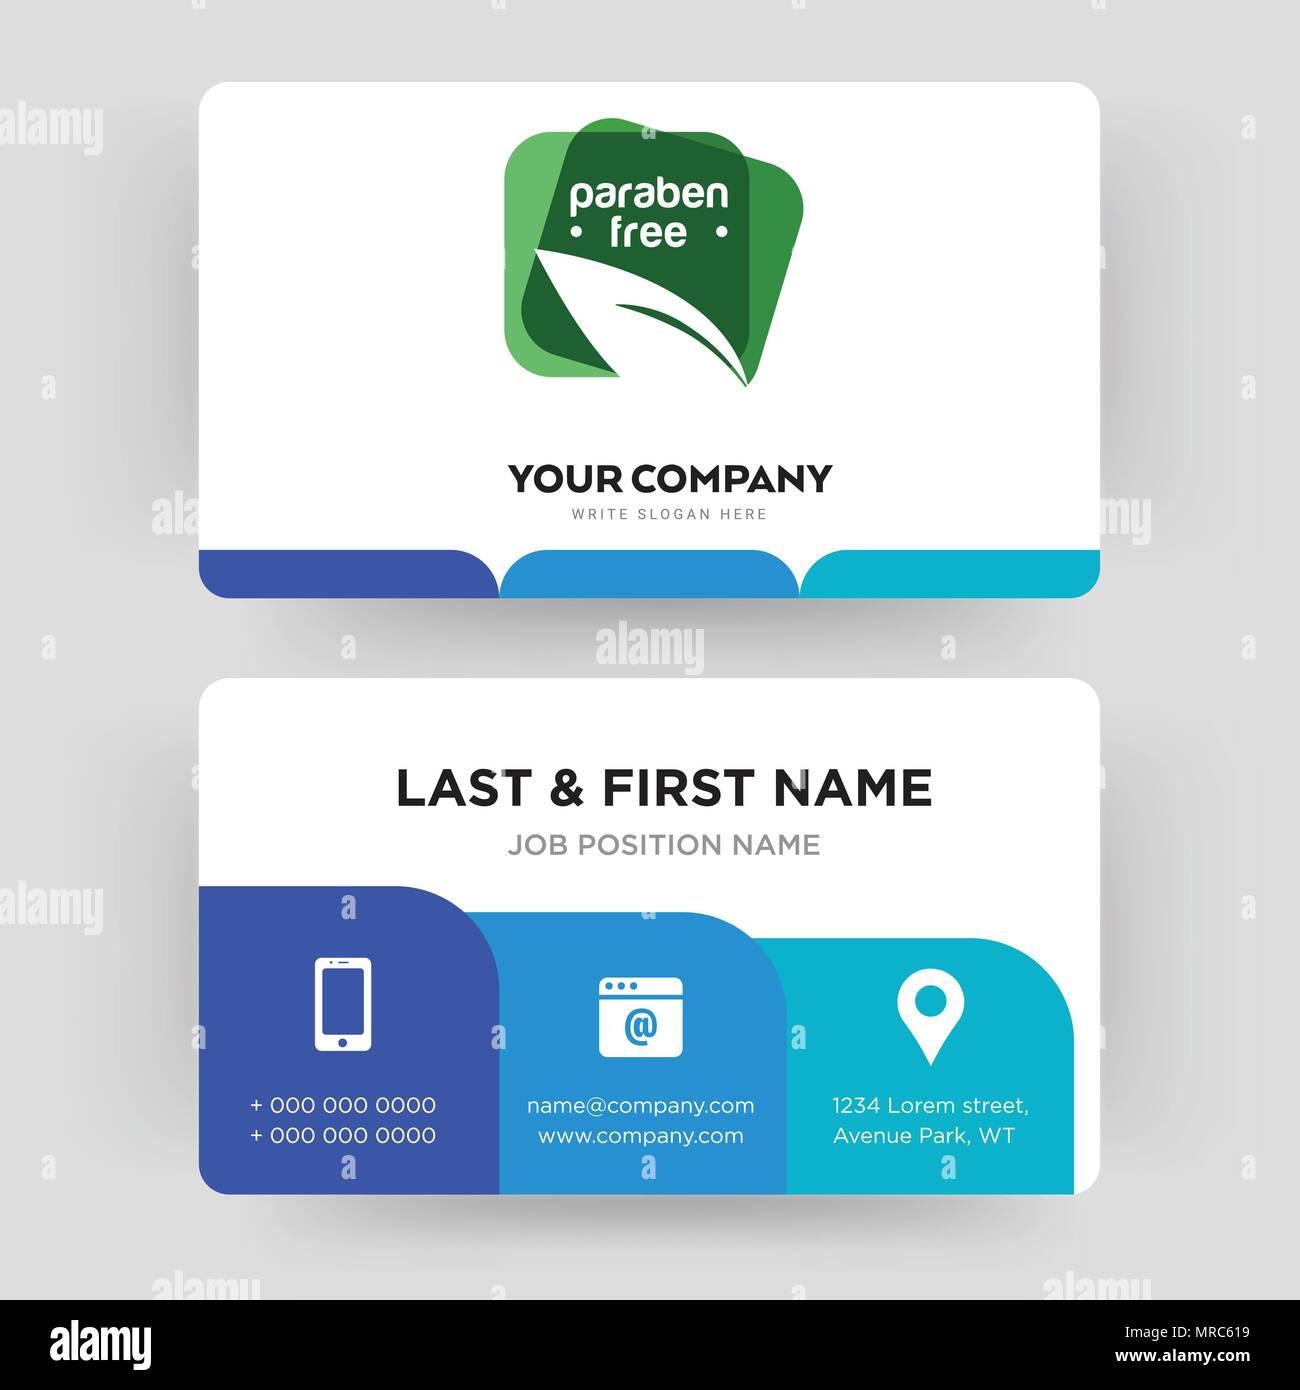 paraben free, business card design template, Visiting for your company, Modern Creative and Clean identity Card Vector Stock Vector